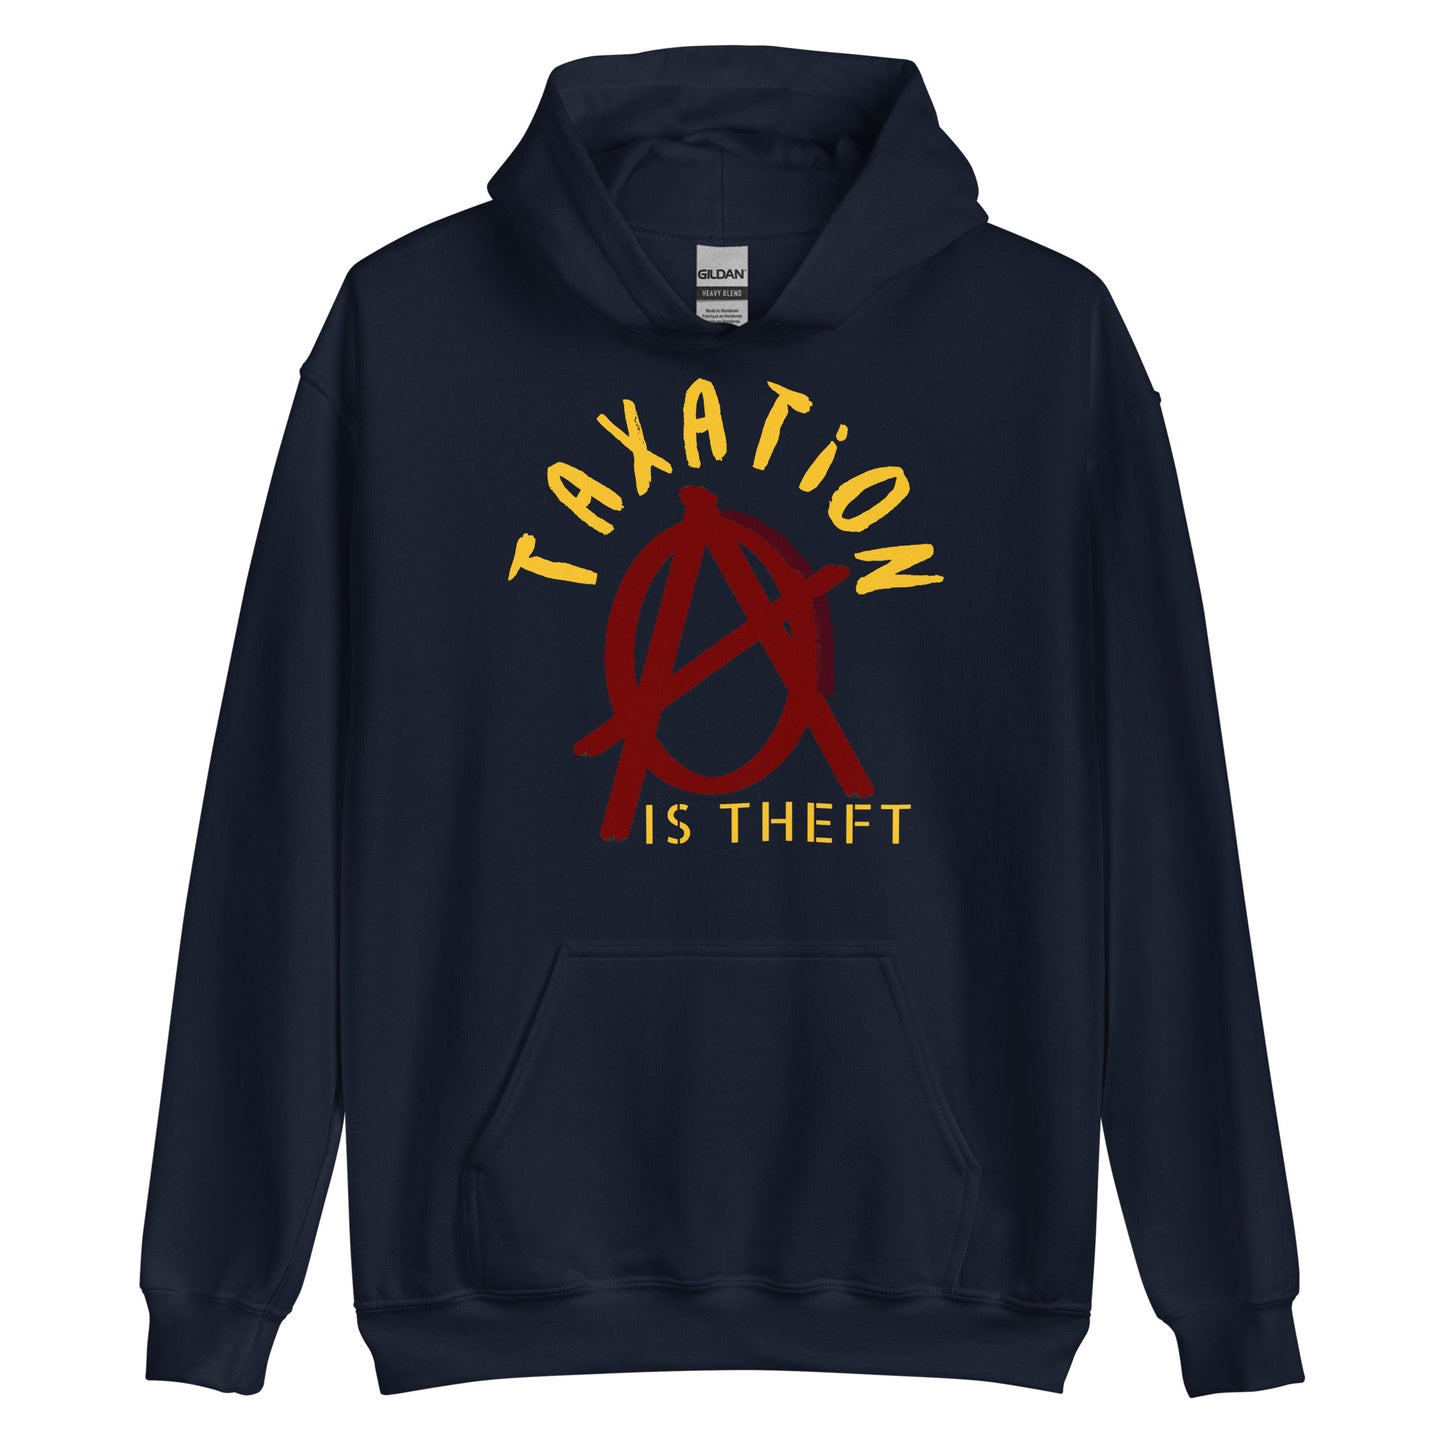 Anarchy Wear Red "Taxation Is Theft" Hoodie